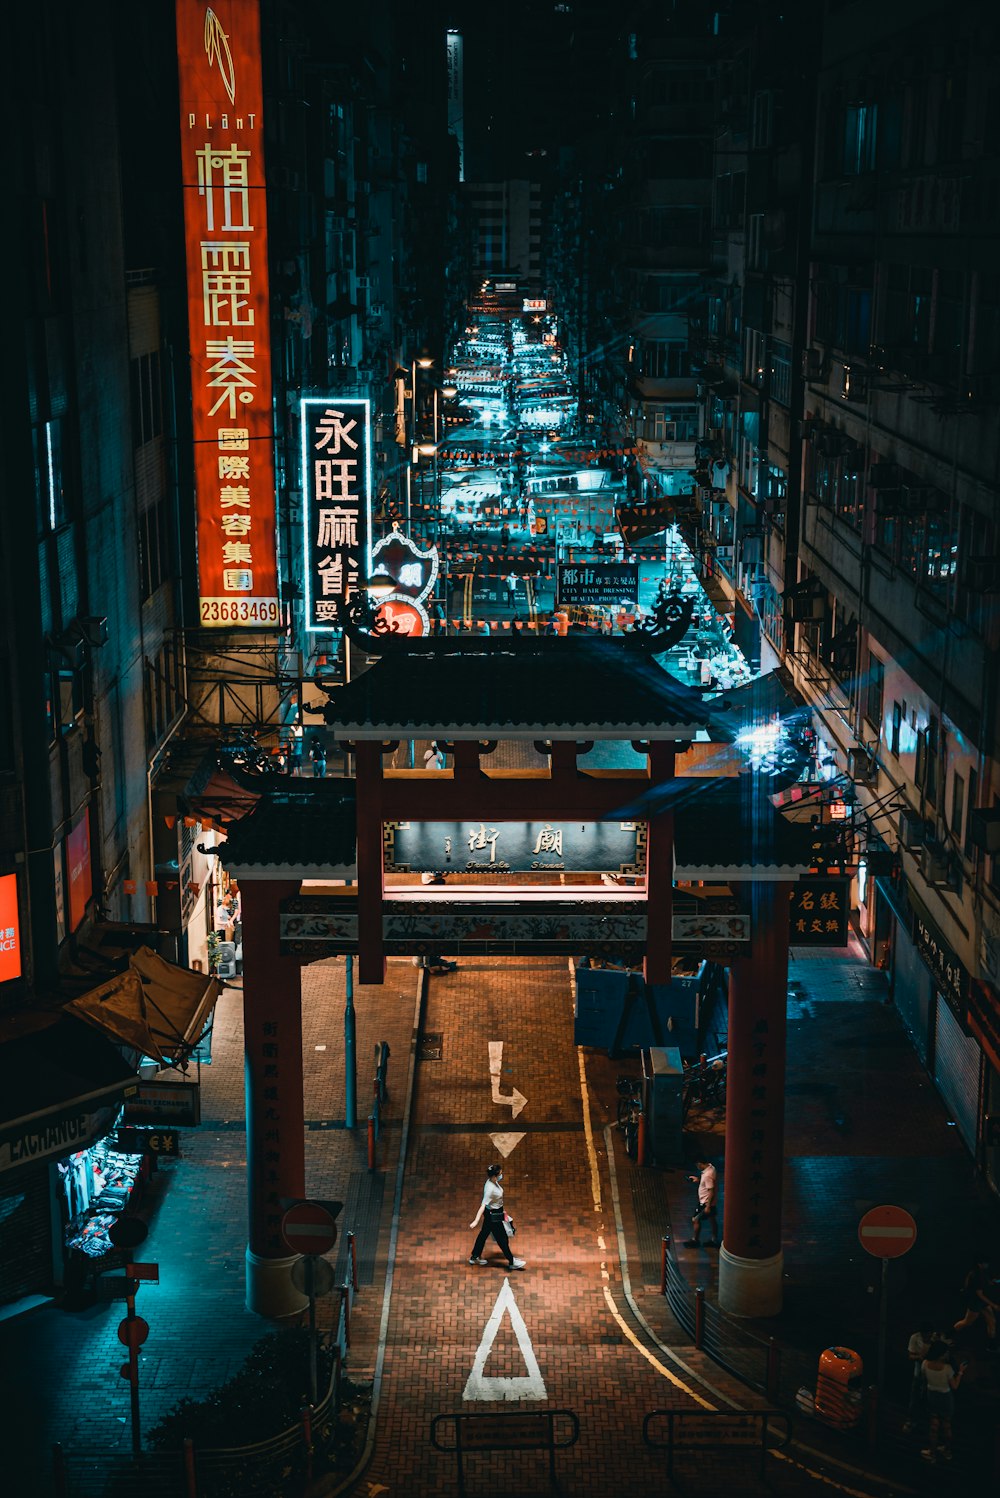 a city street at night with a person walking on the sidewalk